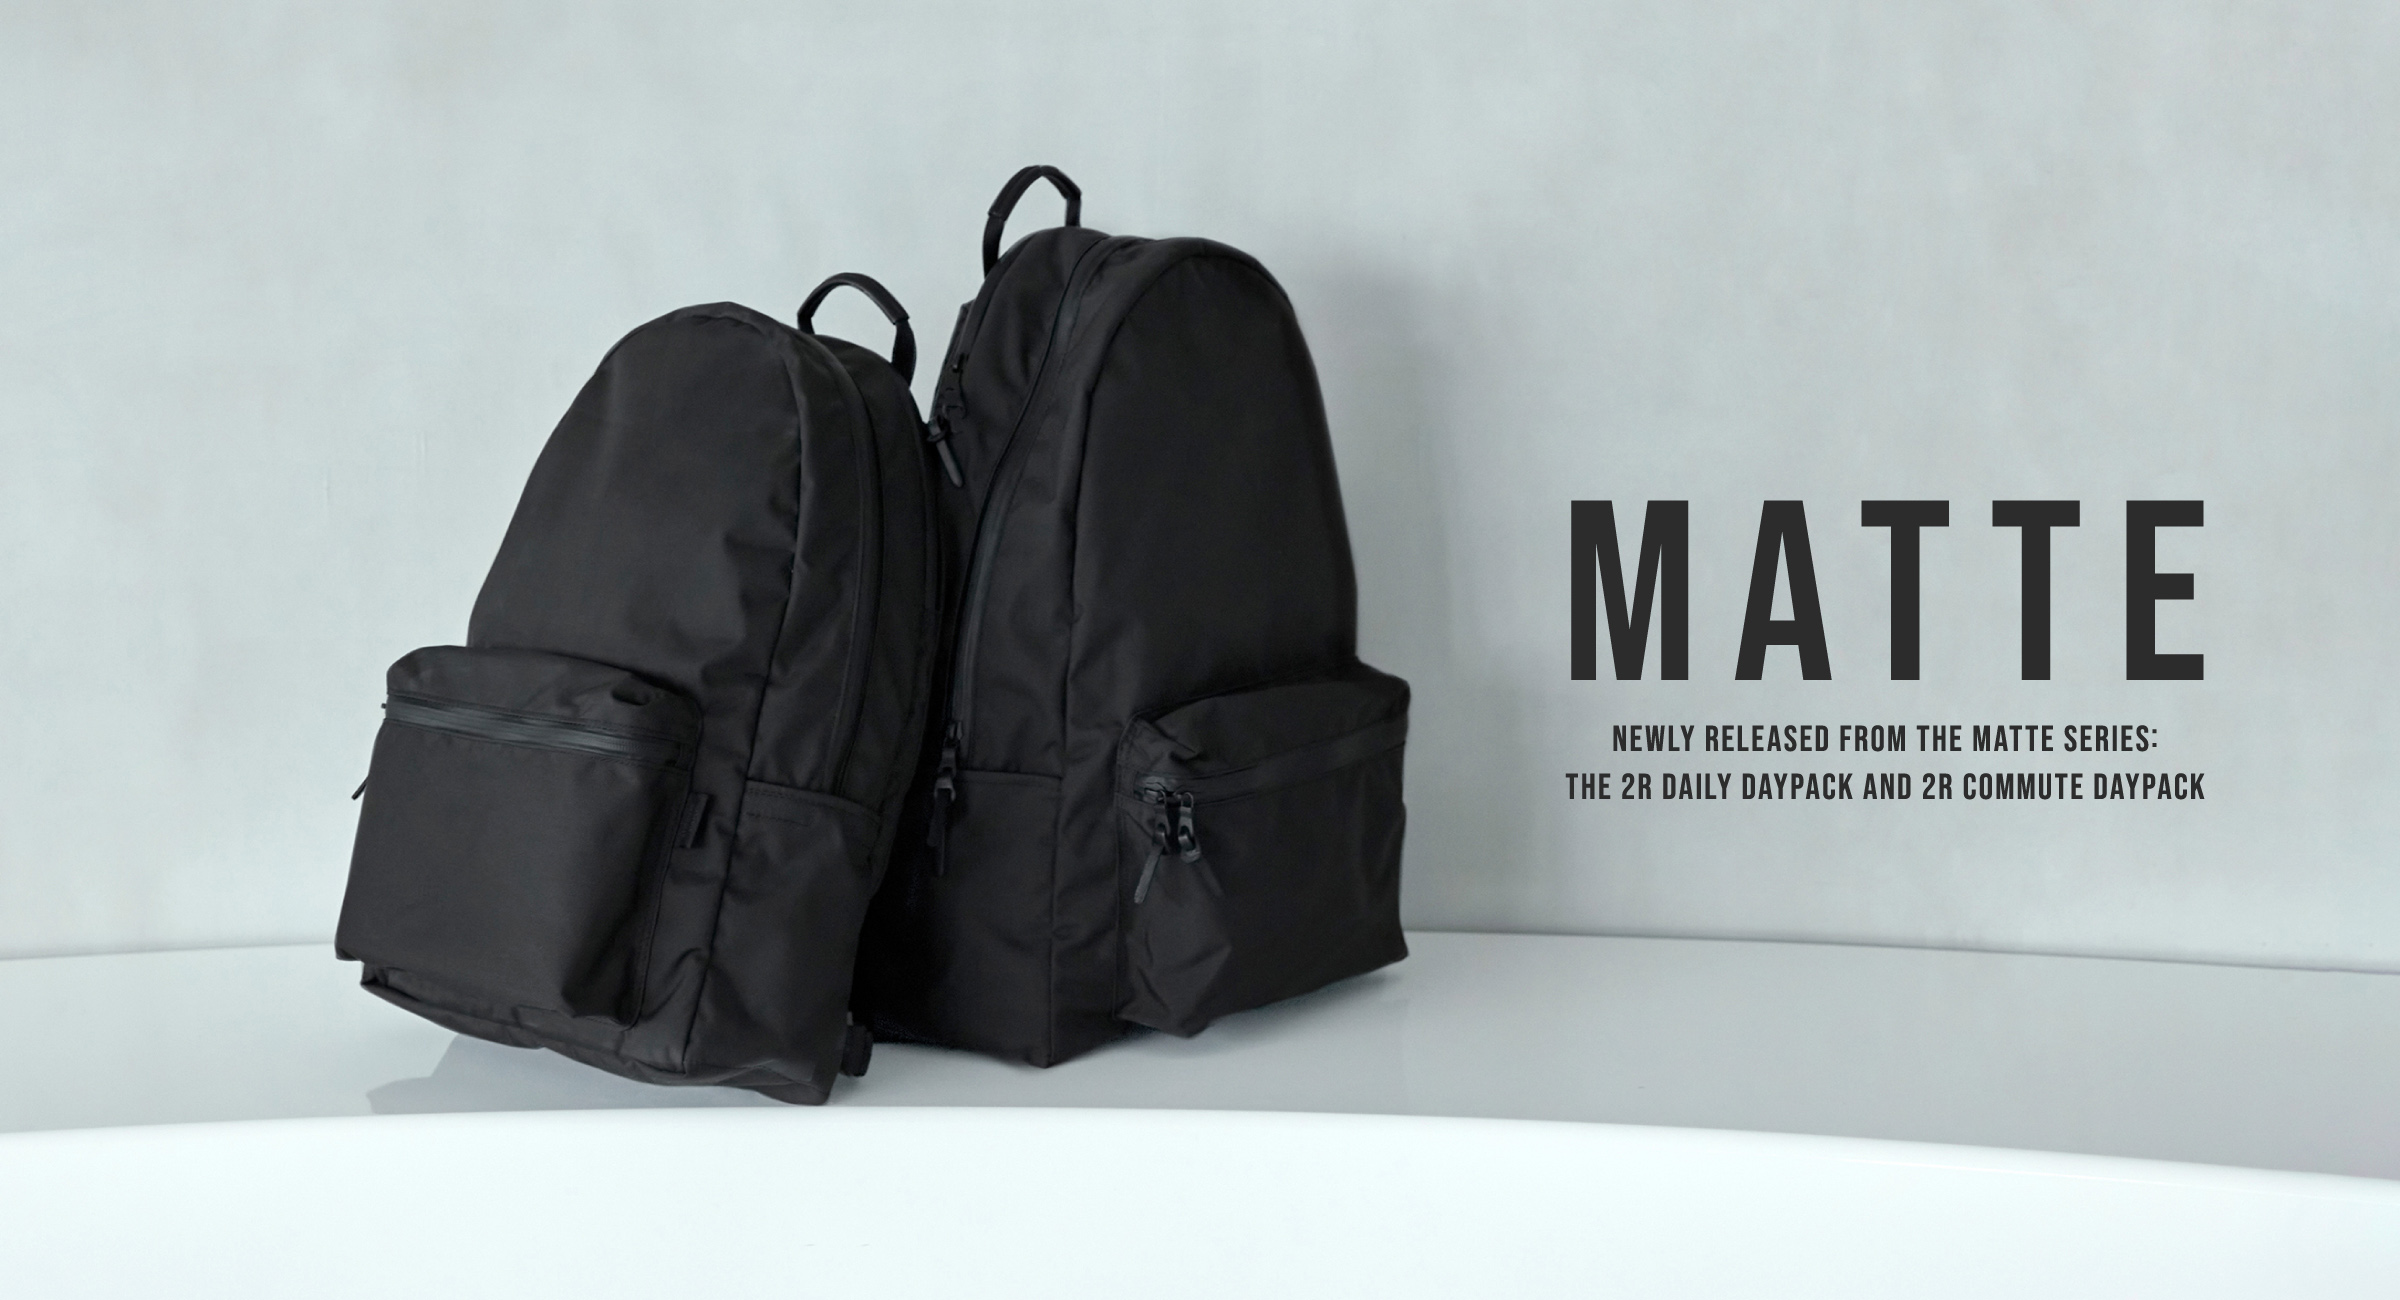 MATTE Newly released from the MATTE series: the 2R DAILY DAYPACK and 2R COMMUTE DAYPACK